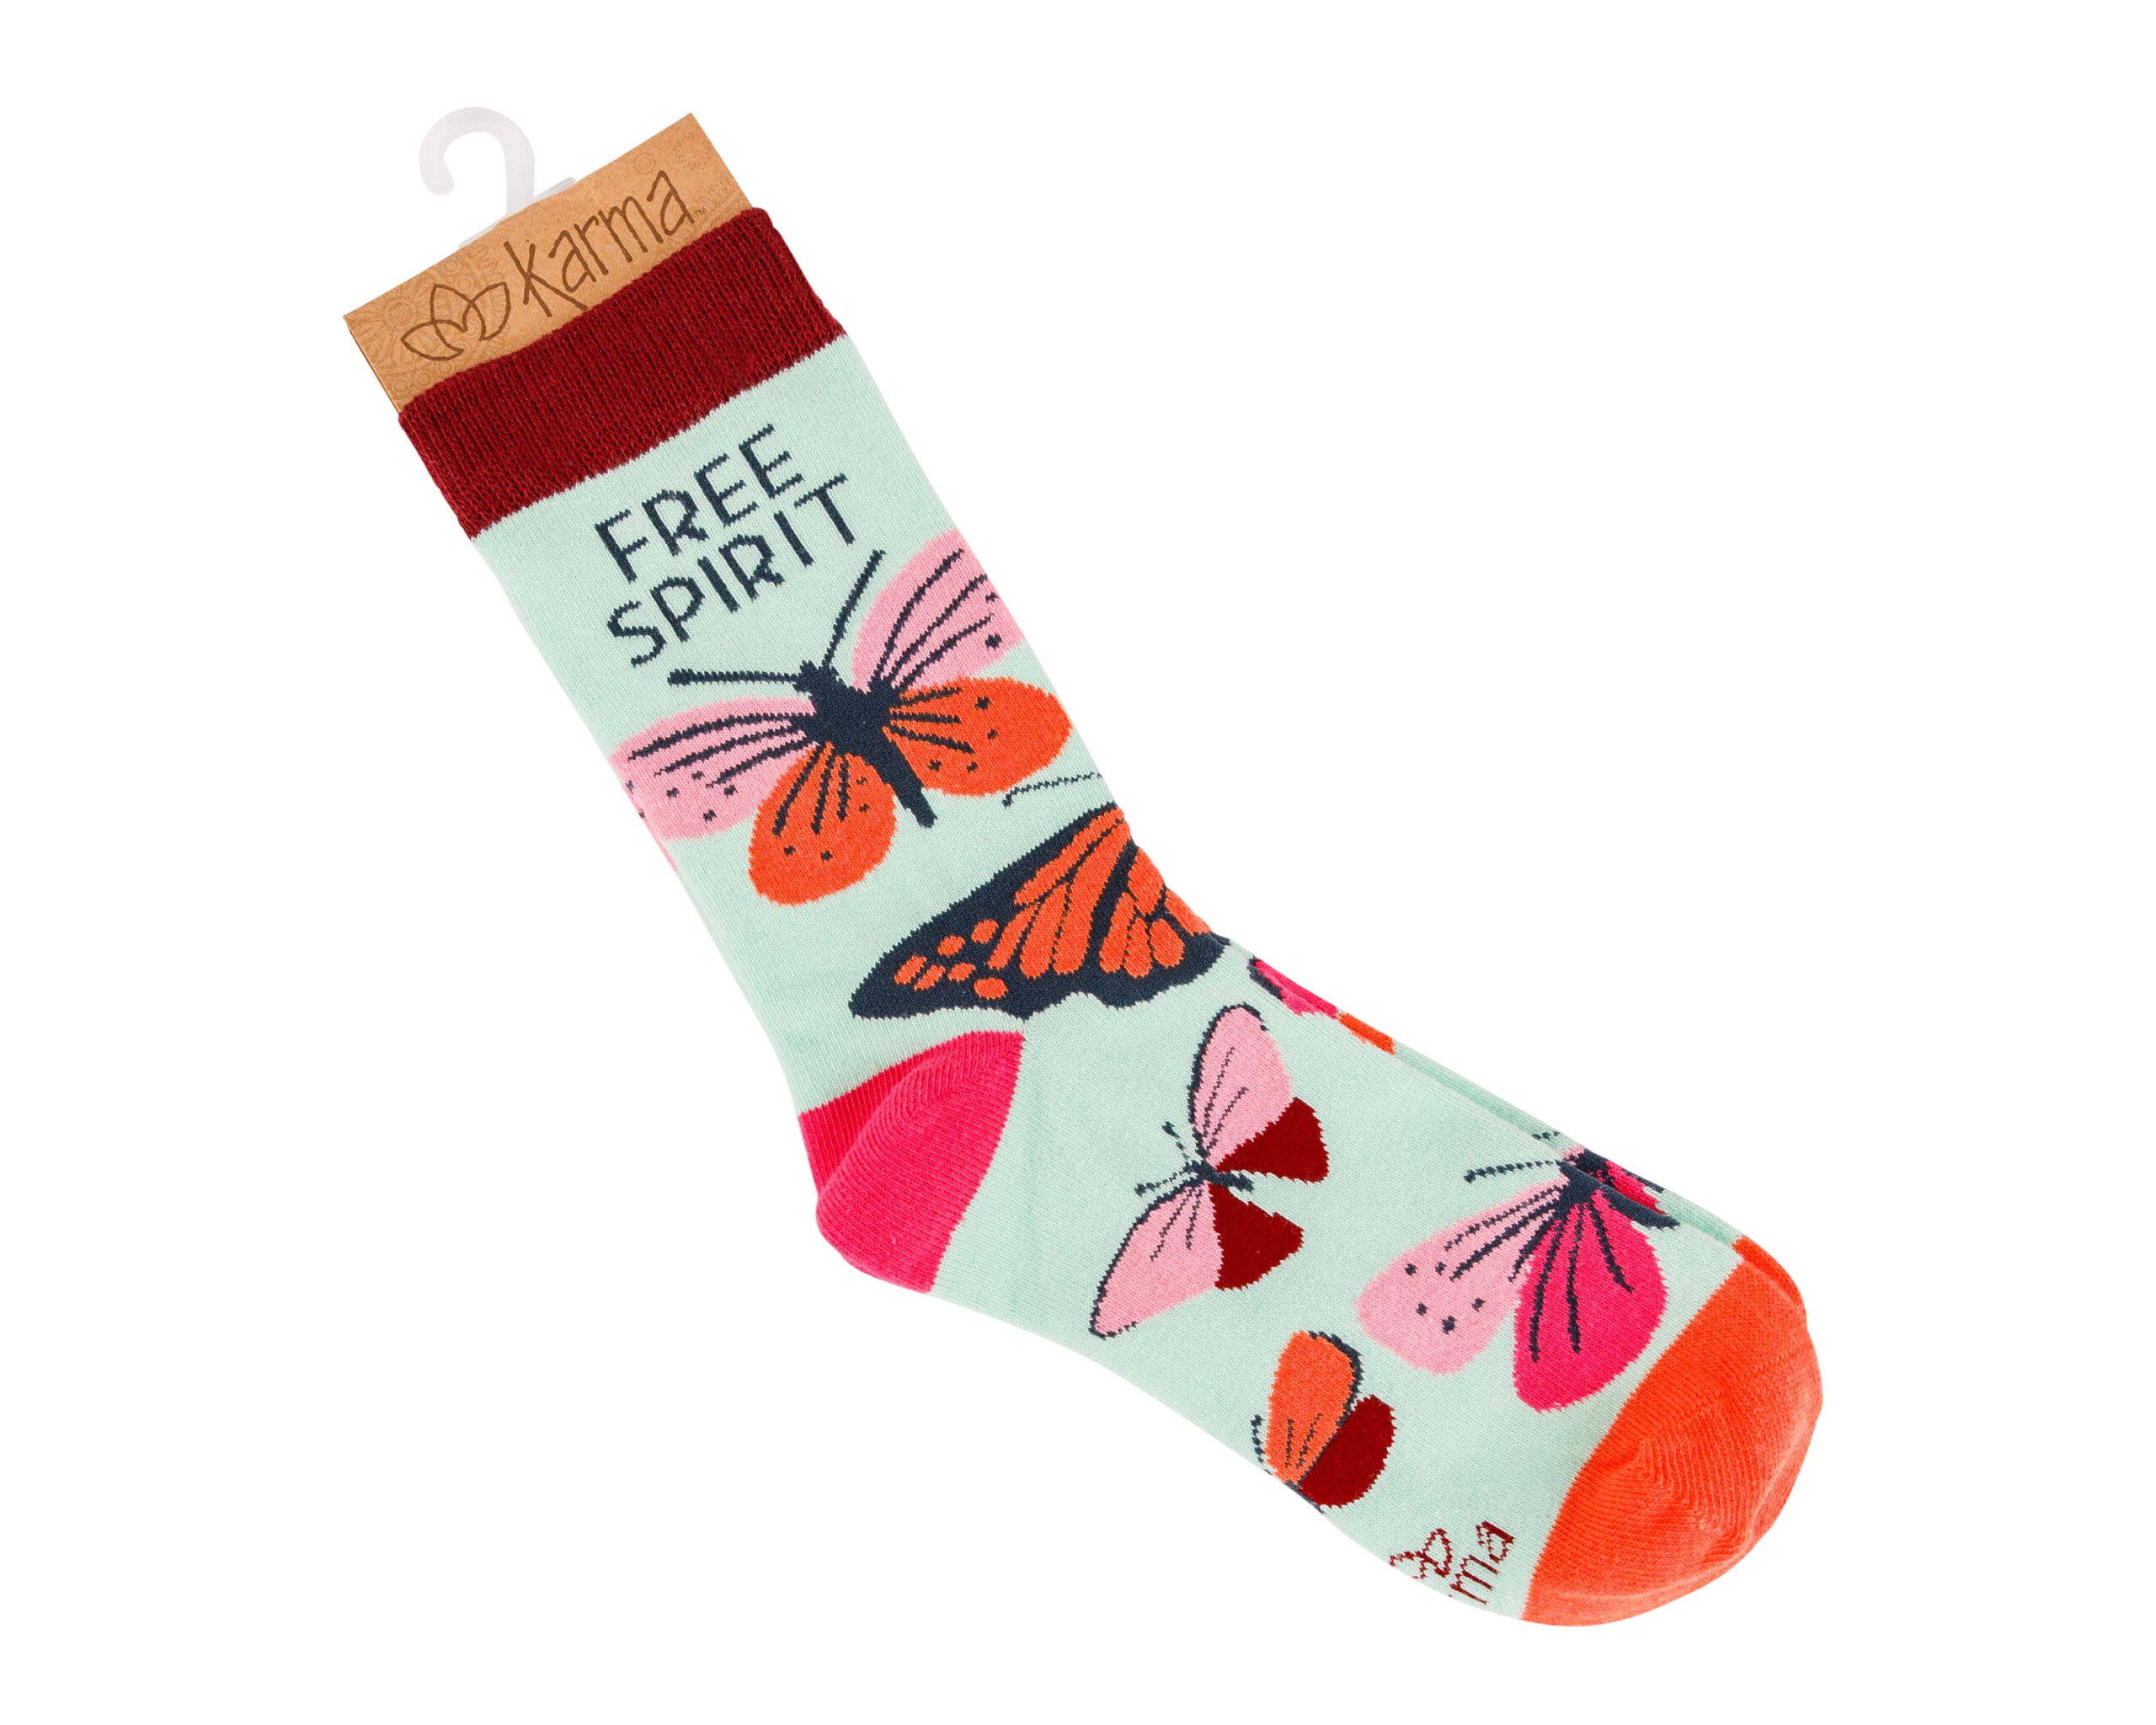 Sock Product Photography